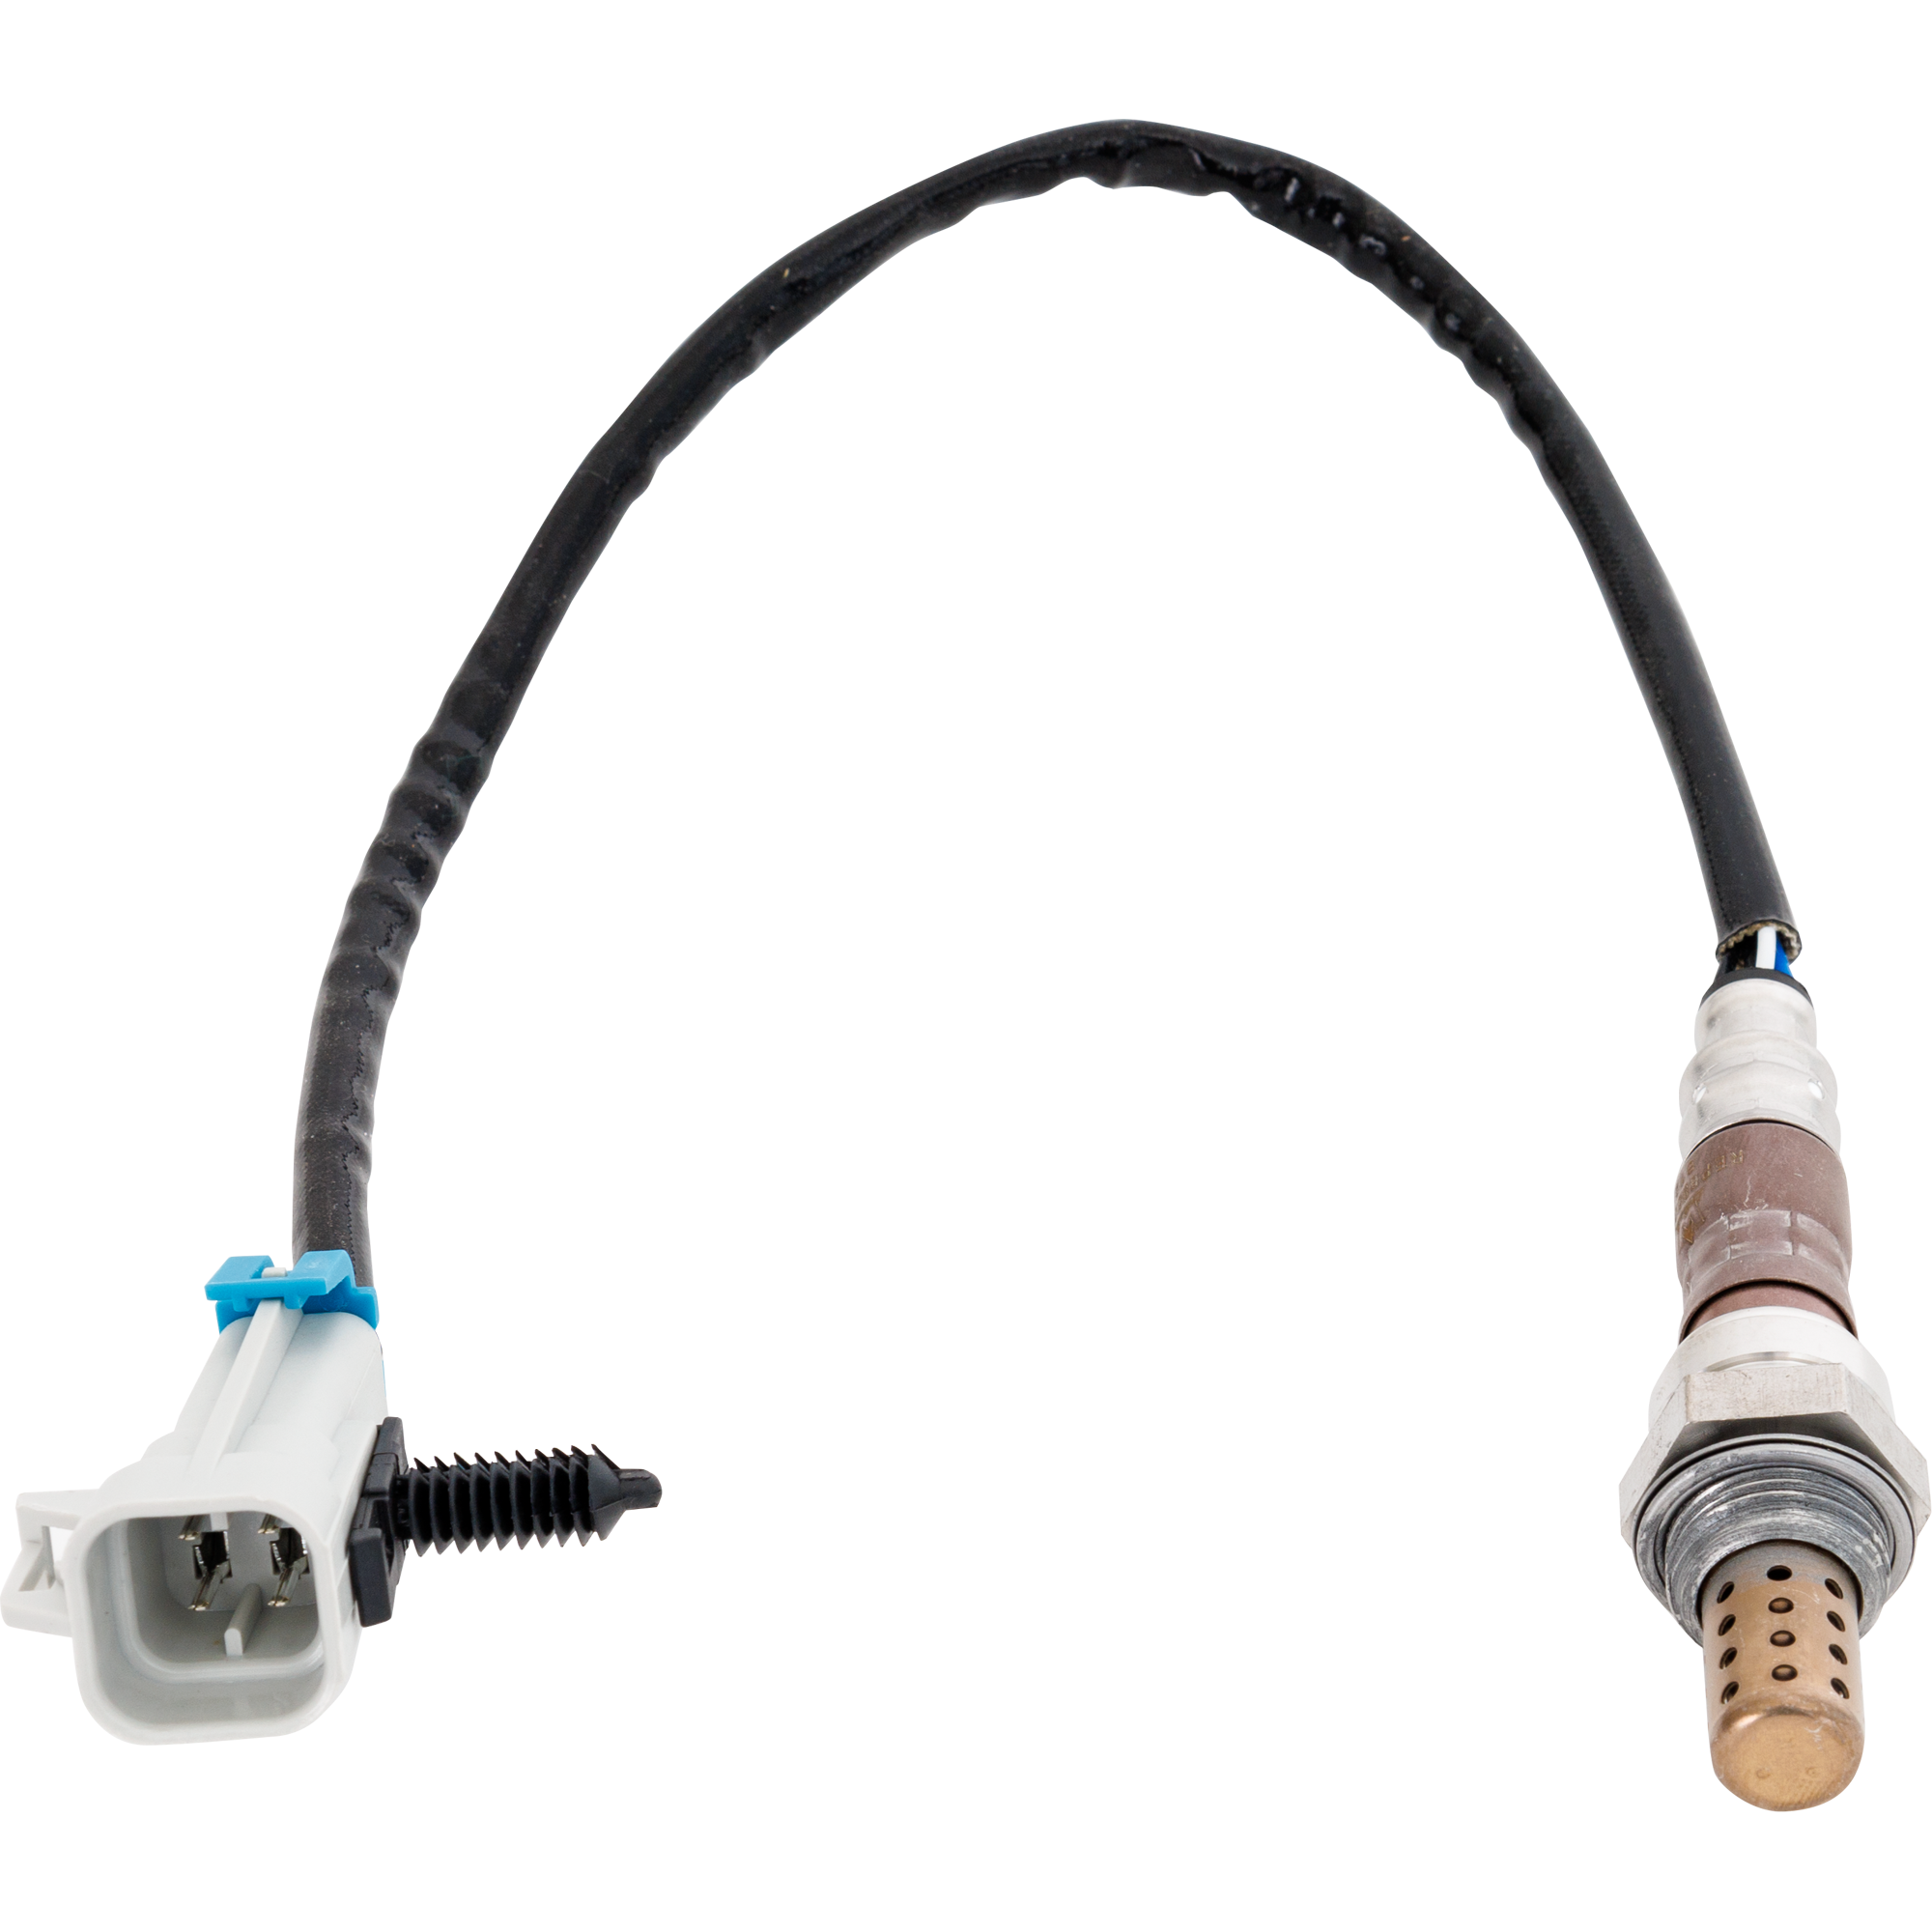 DriveWire Oxygen Sensor, 4-Wire, Heated, With Female Connector